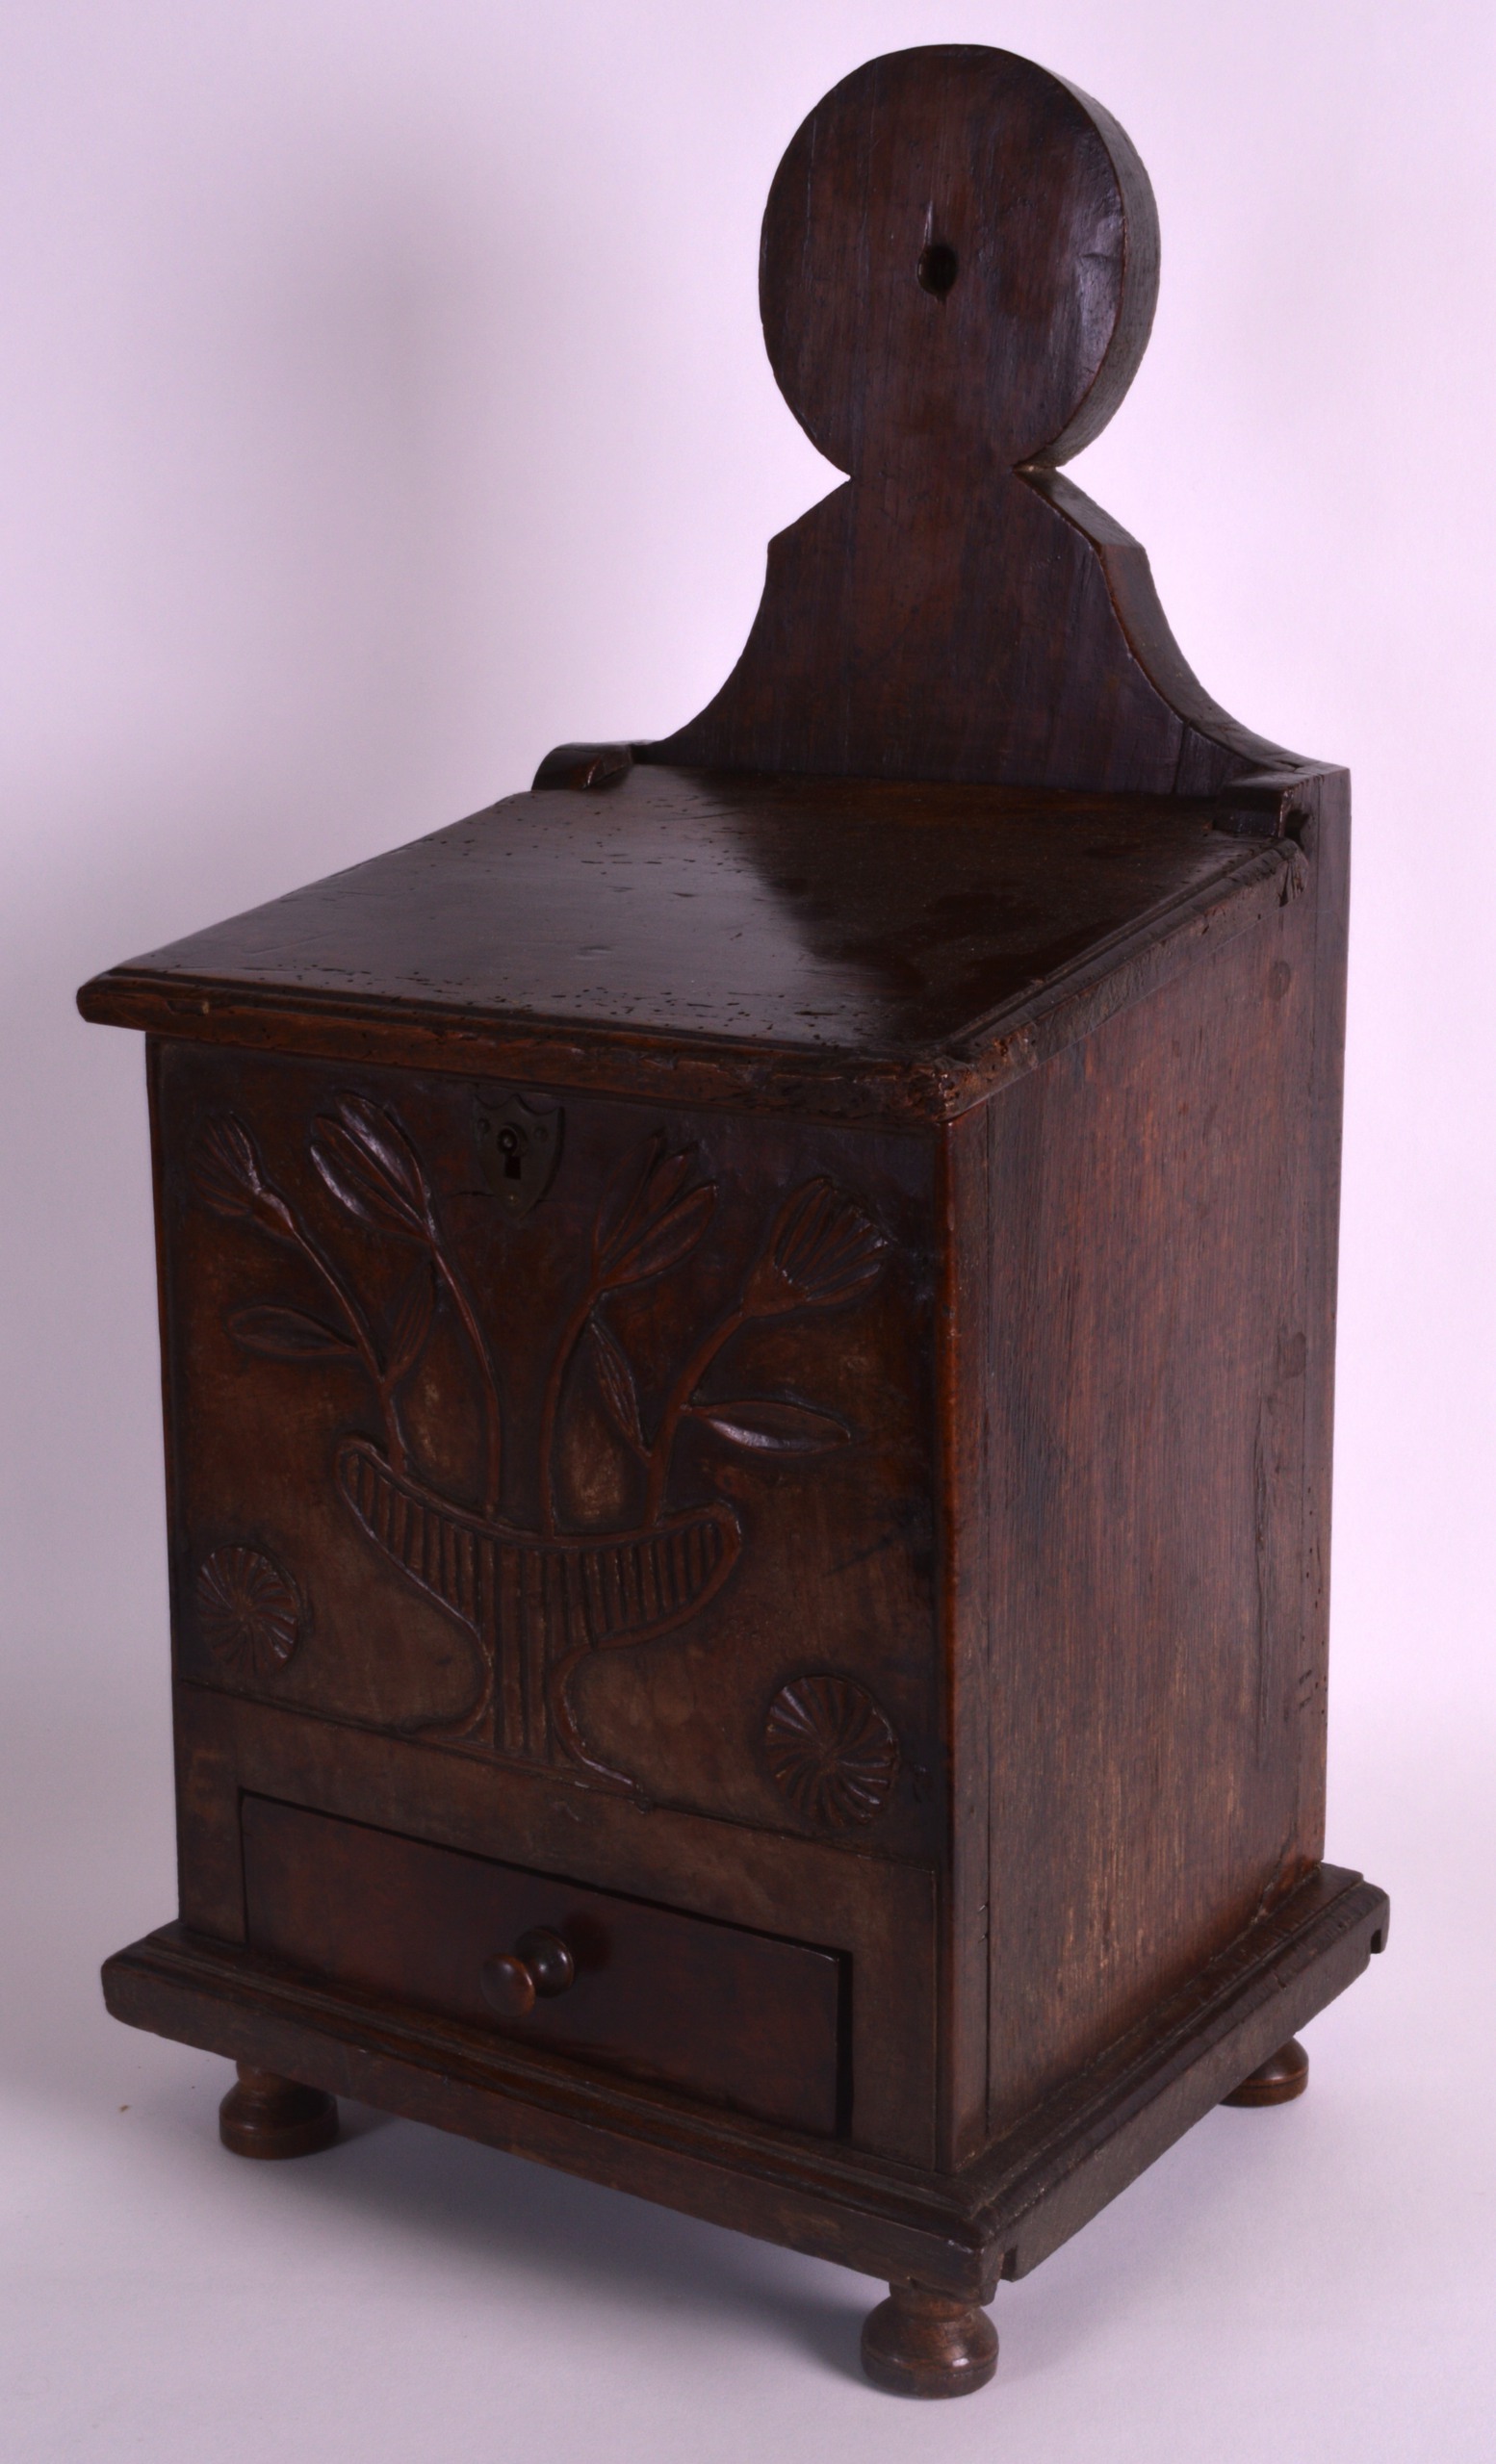 A GOOD 18TH CENTURY OAK SALT BOX carved with a central urn with extensive foliage. 1Ft 9ins high.